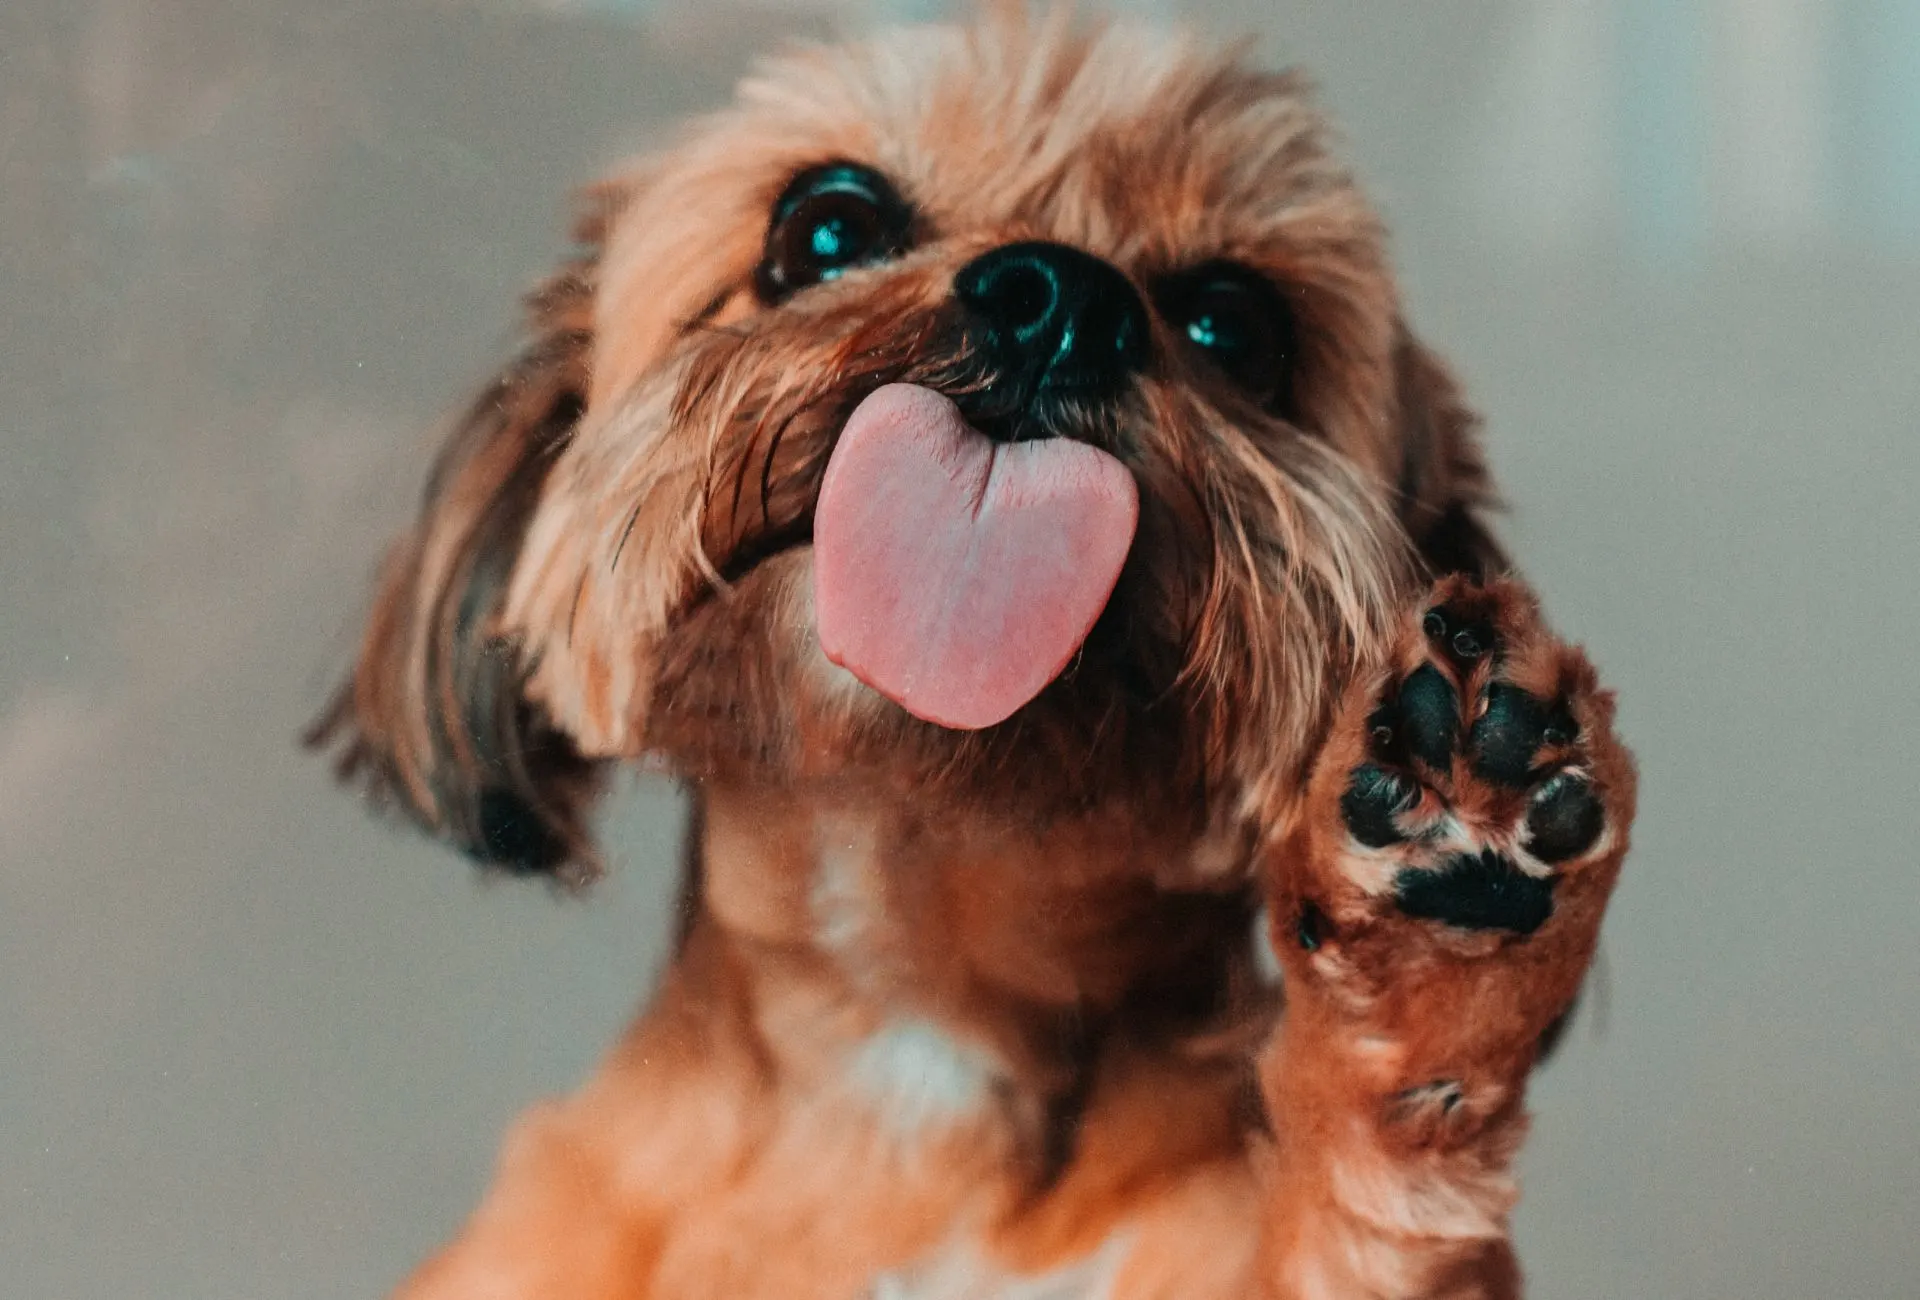 Small, brown dog licking the screen.